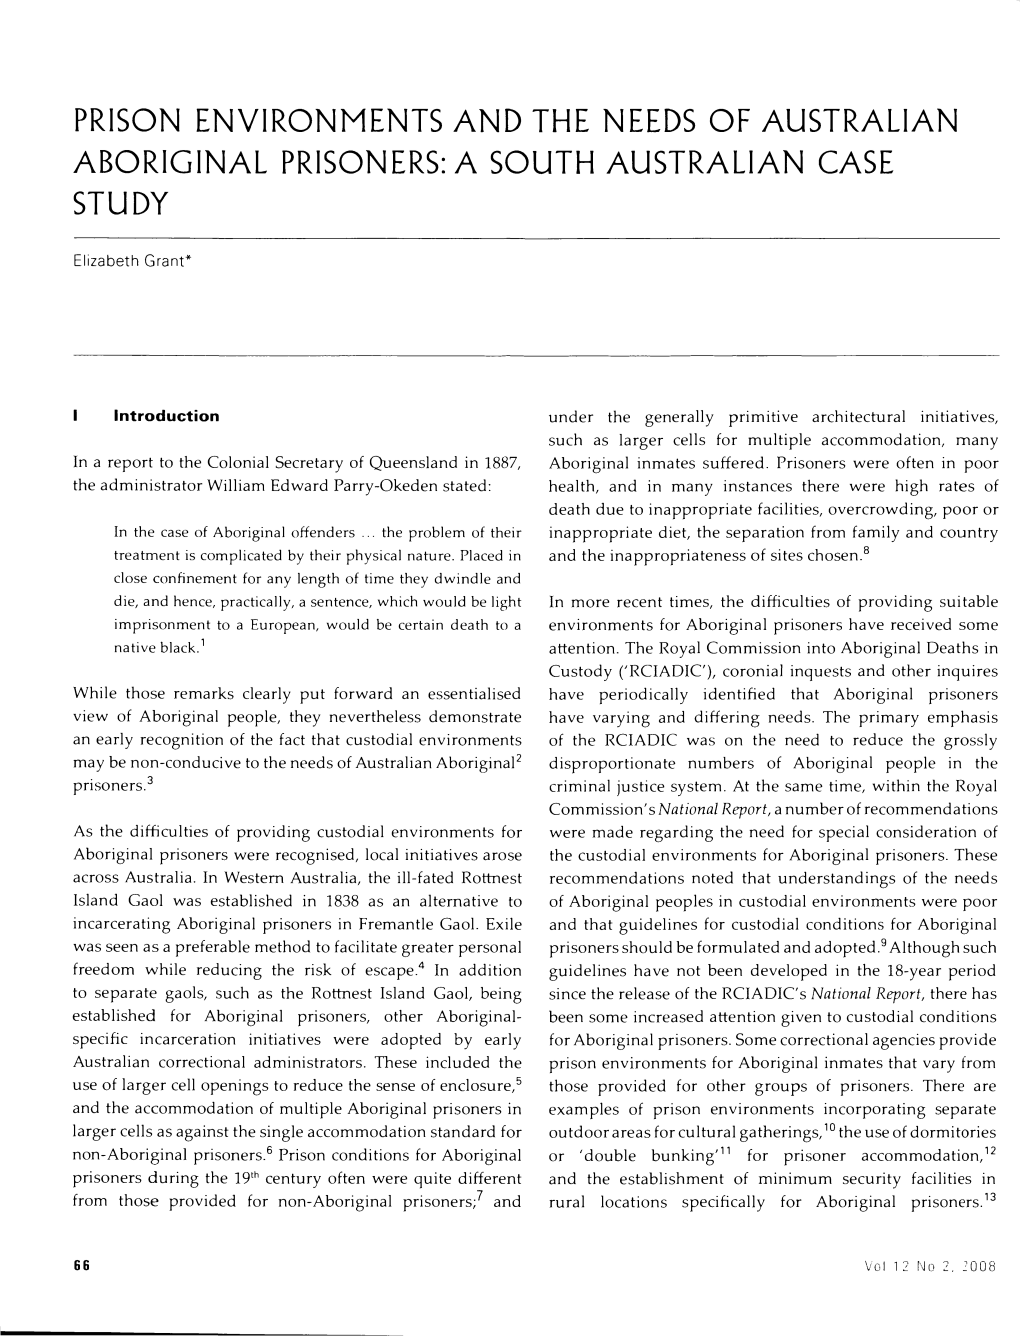 Prison Environments and the Needs of Australian Aboriginal Prisoners: a South Australian Case Study